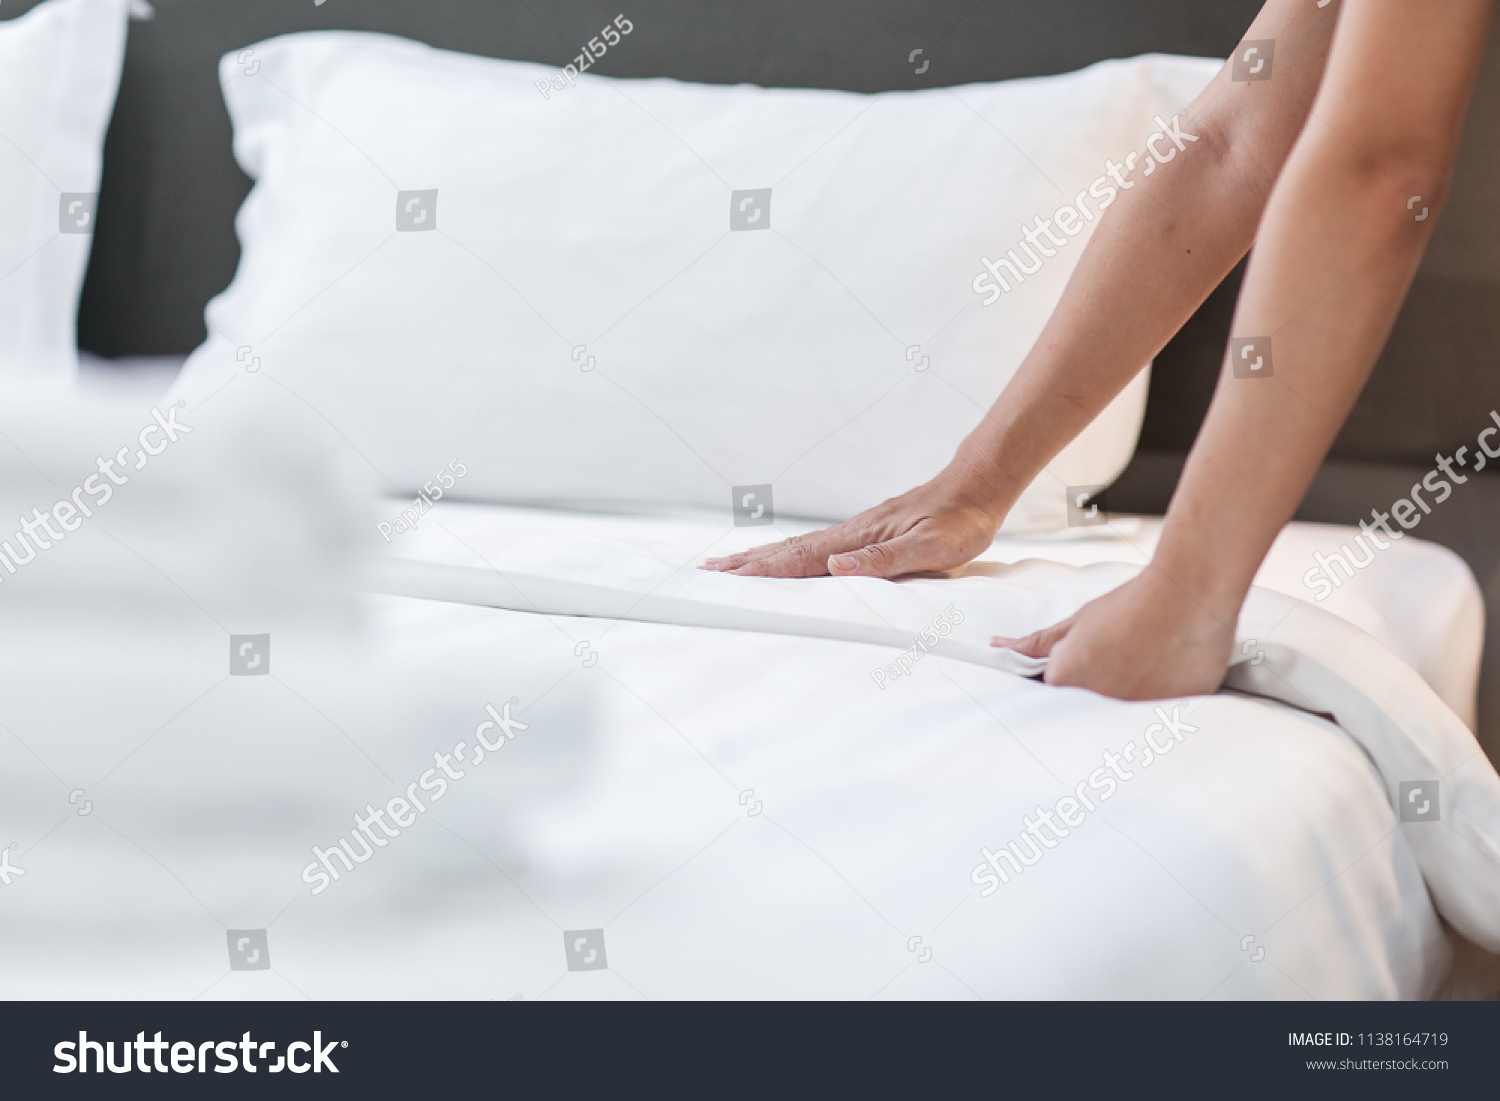 Hands Making Bed from Hotel Room Service #1138164719